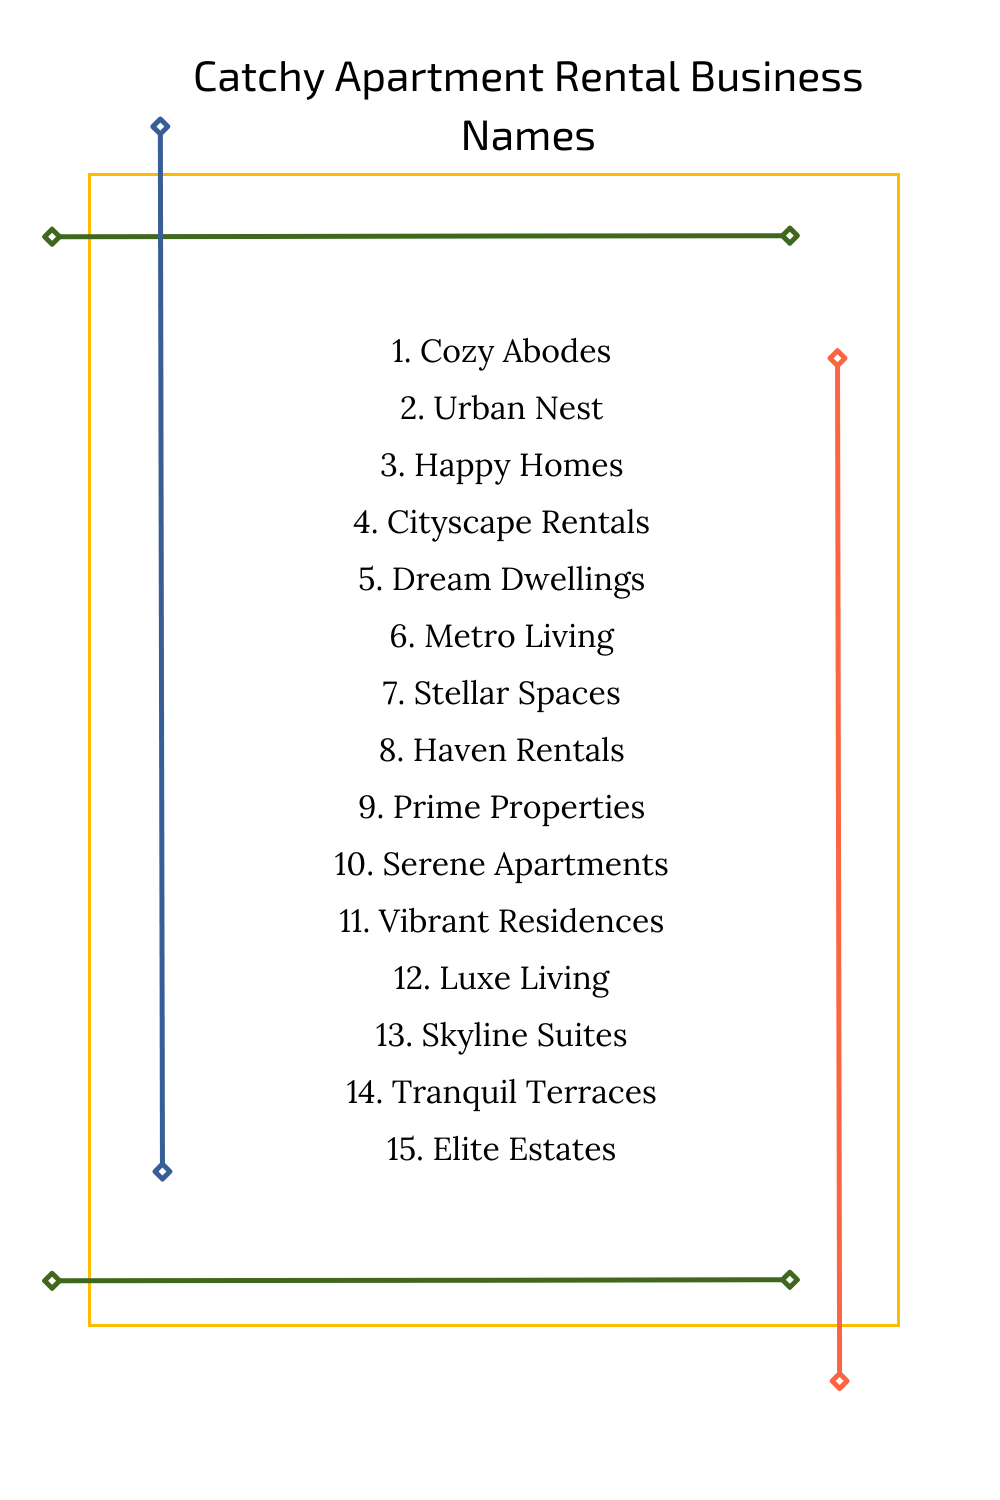 Catchy Apartment Rental Business Names